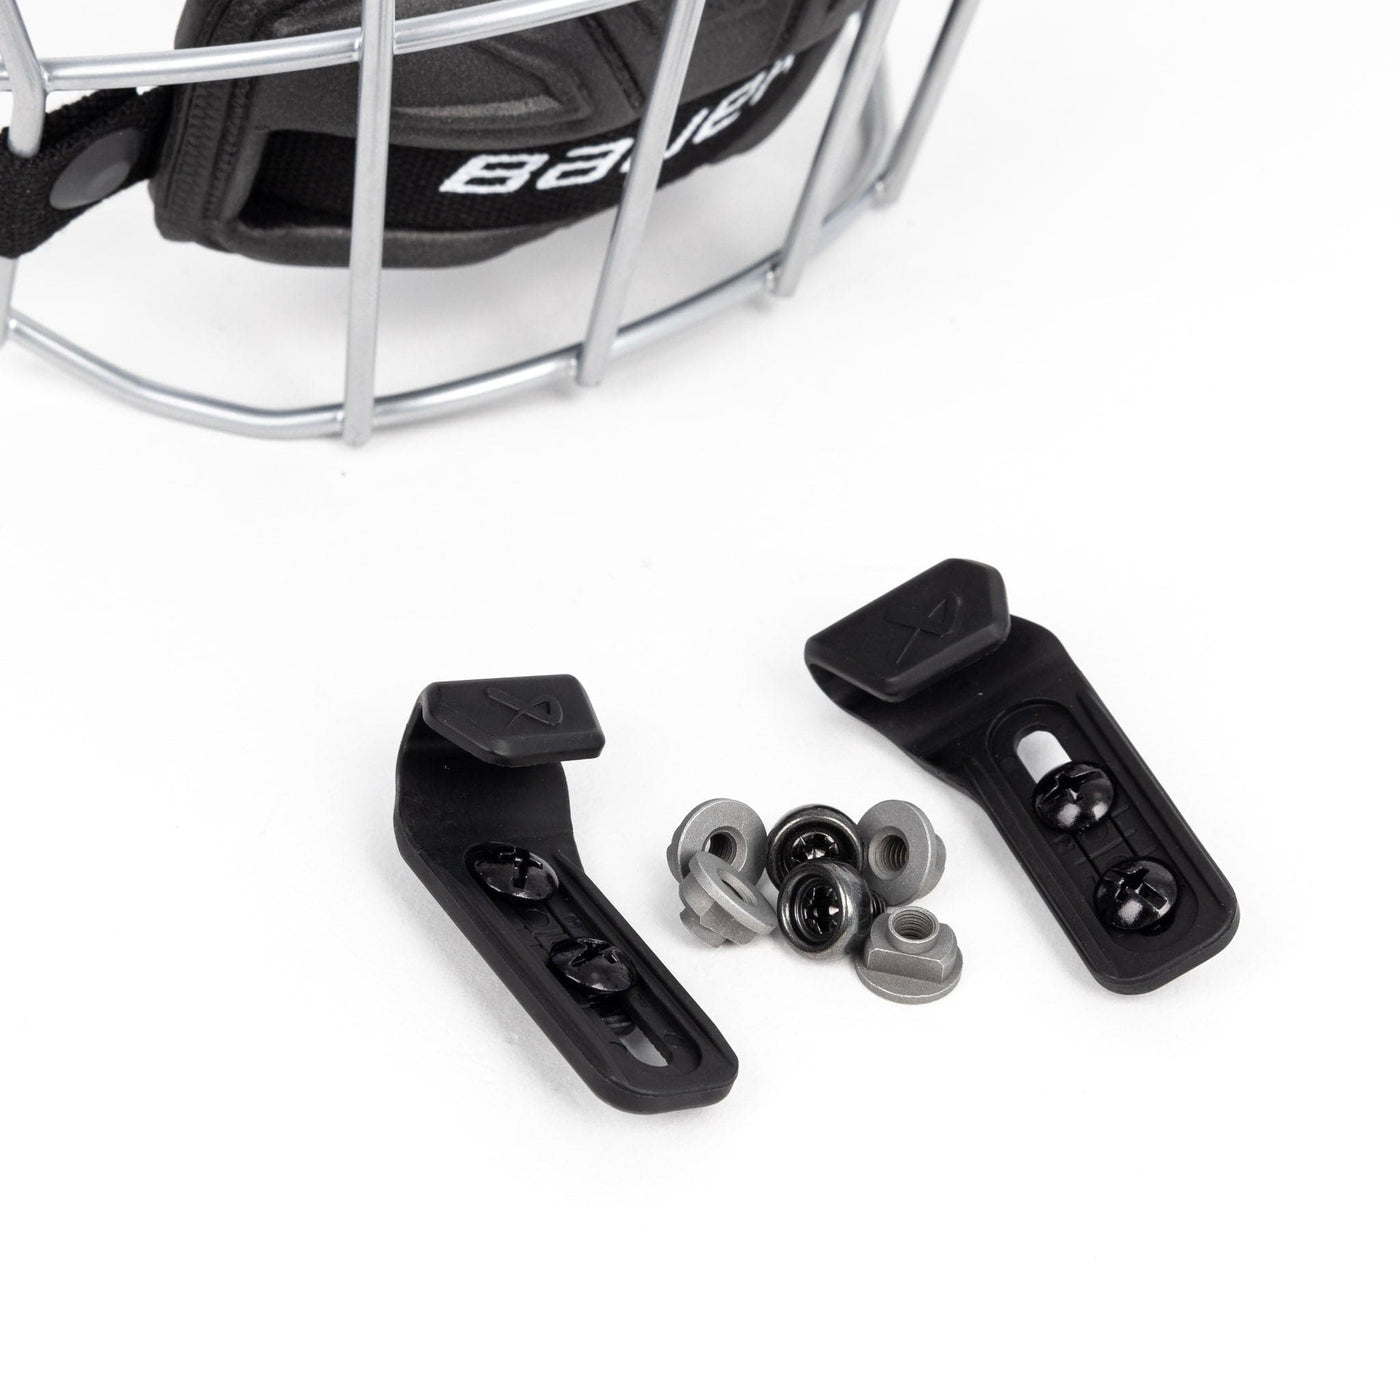 Bauer I Senior Hockey Cage - The Hockey Shop Source For Sports